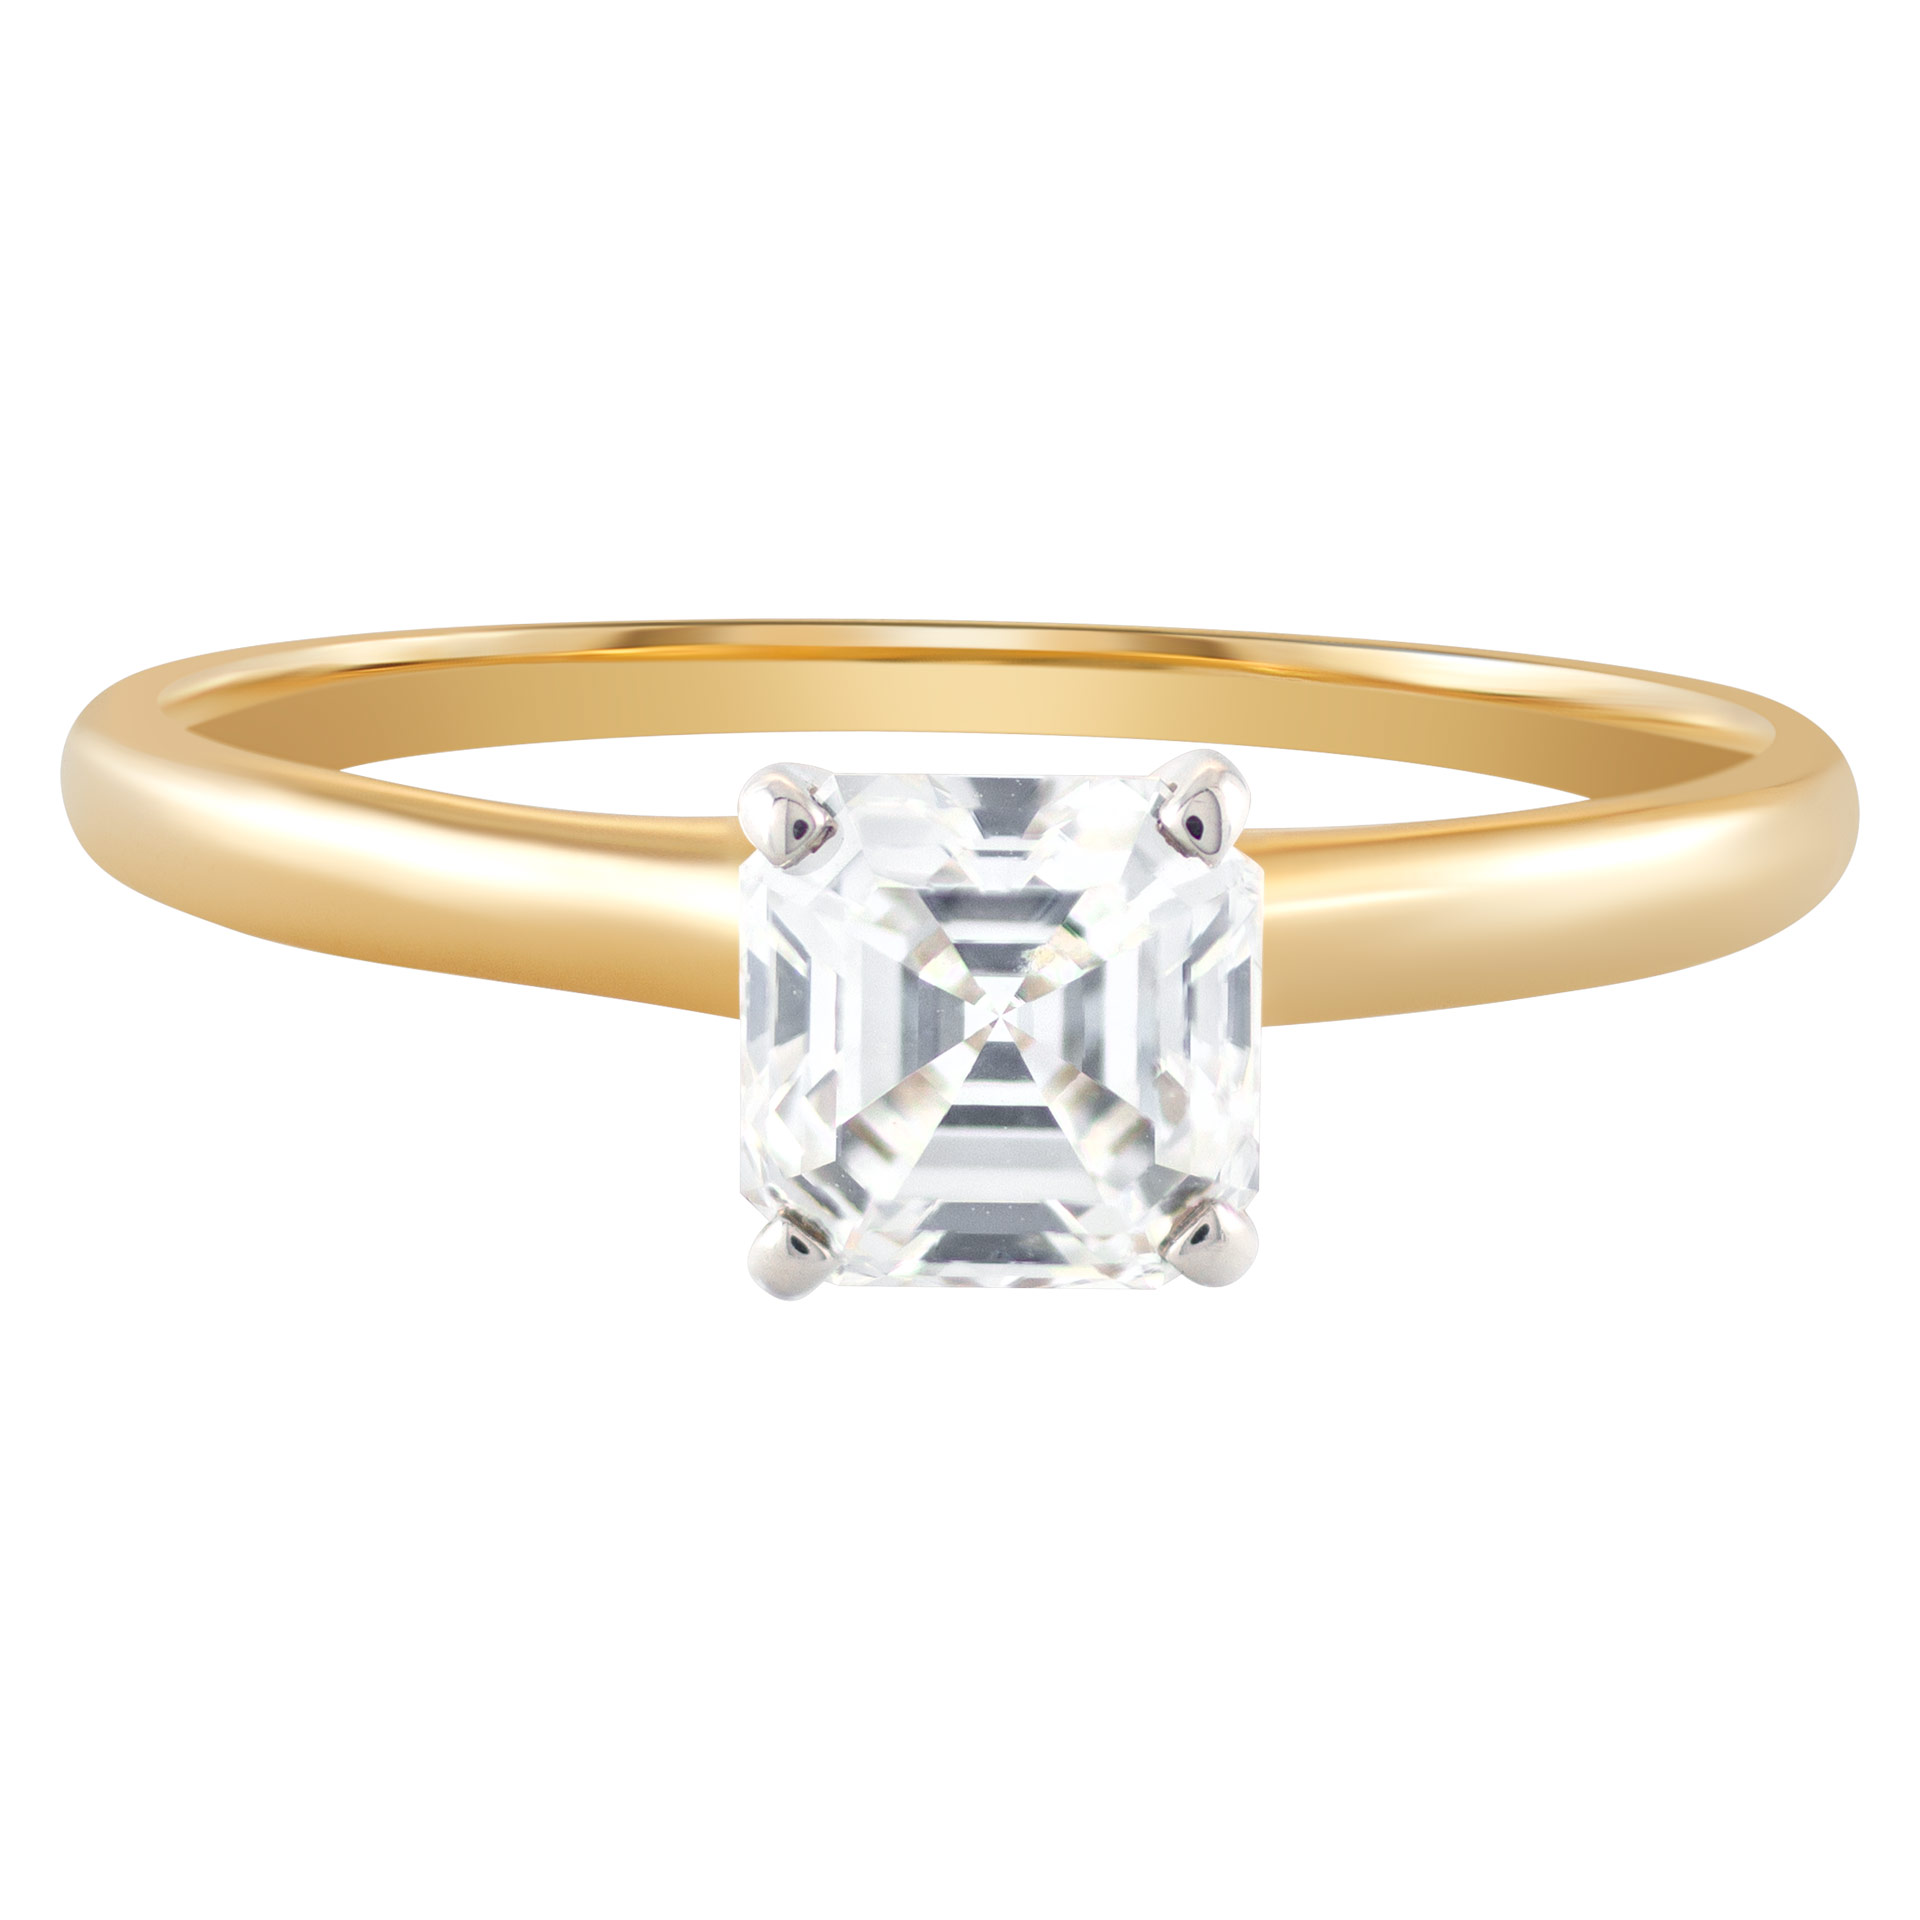 GIA Certified Emerald cut diamond 1.08 cts (J Color, VS1 Clarity) solitaire ring set in 14k yellow gold. Size 9.5